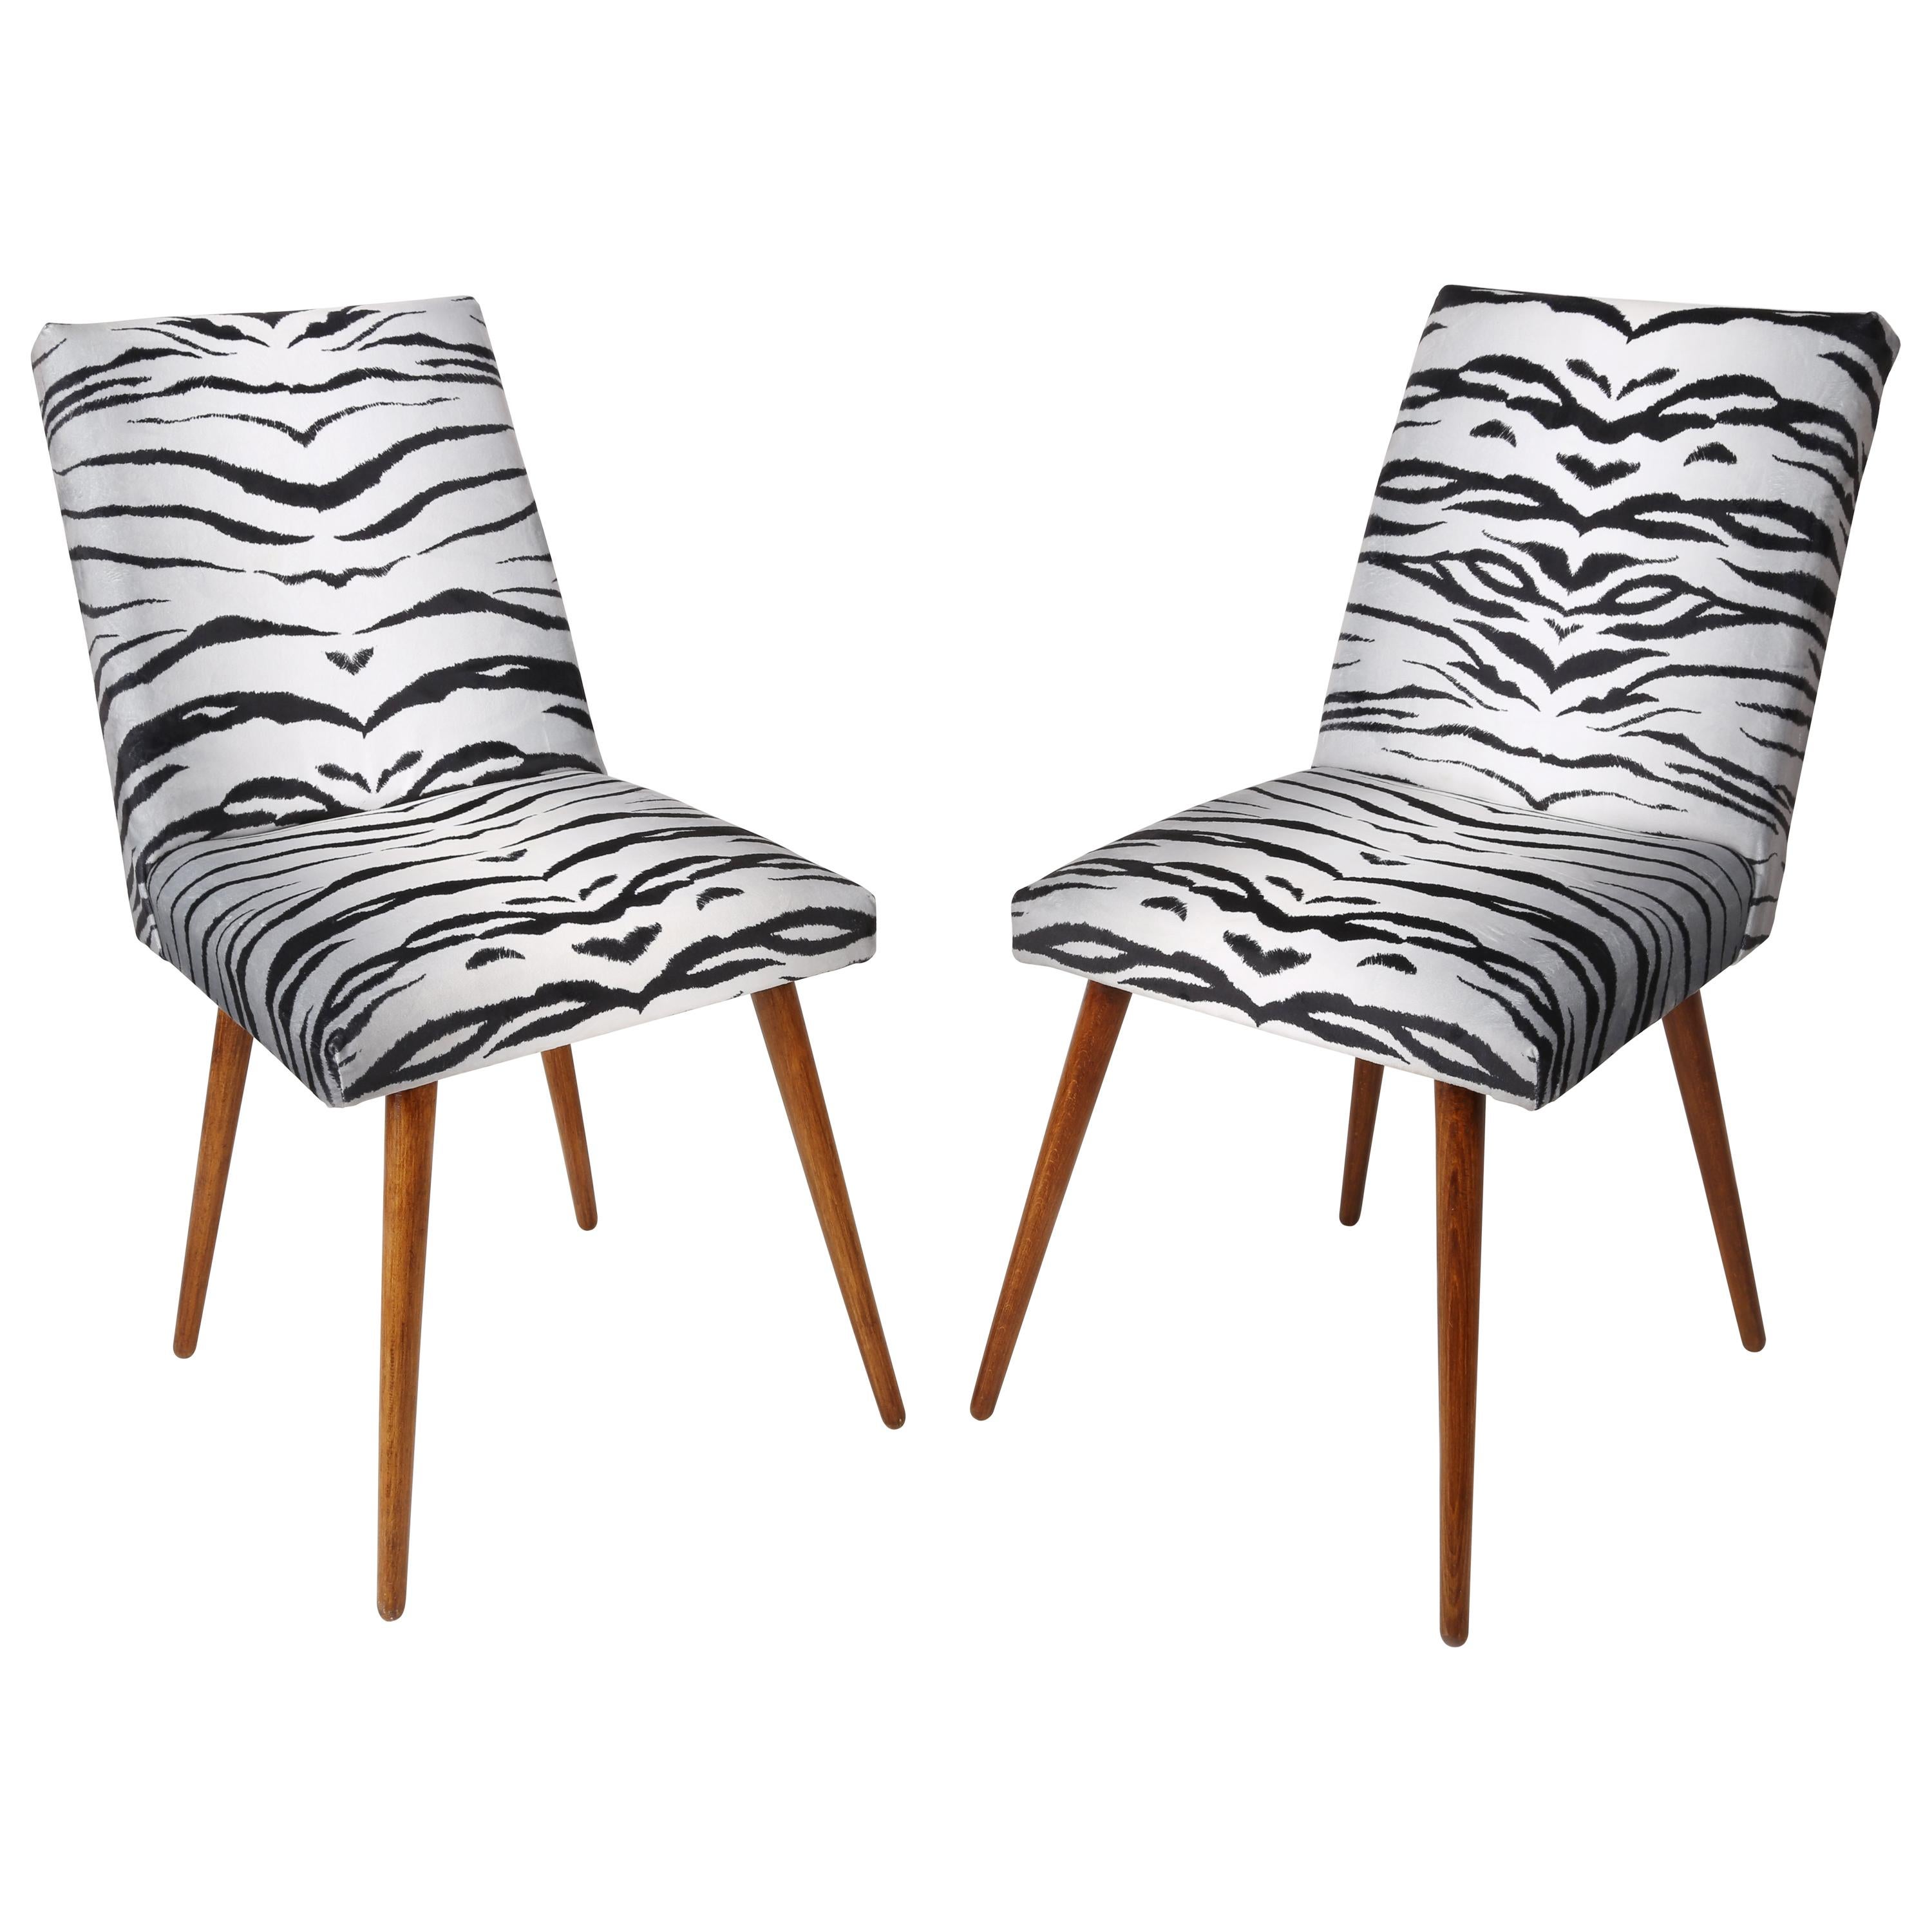 Set of Two 20th Century Black and White Zebra Velvet Chairs, 1960s For Sale